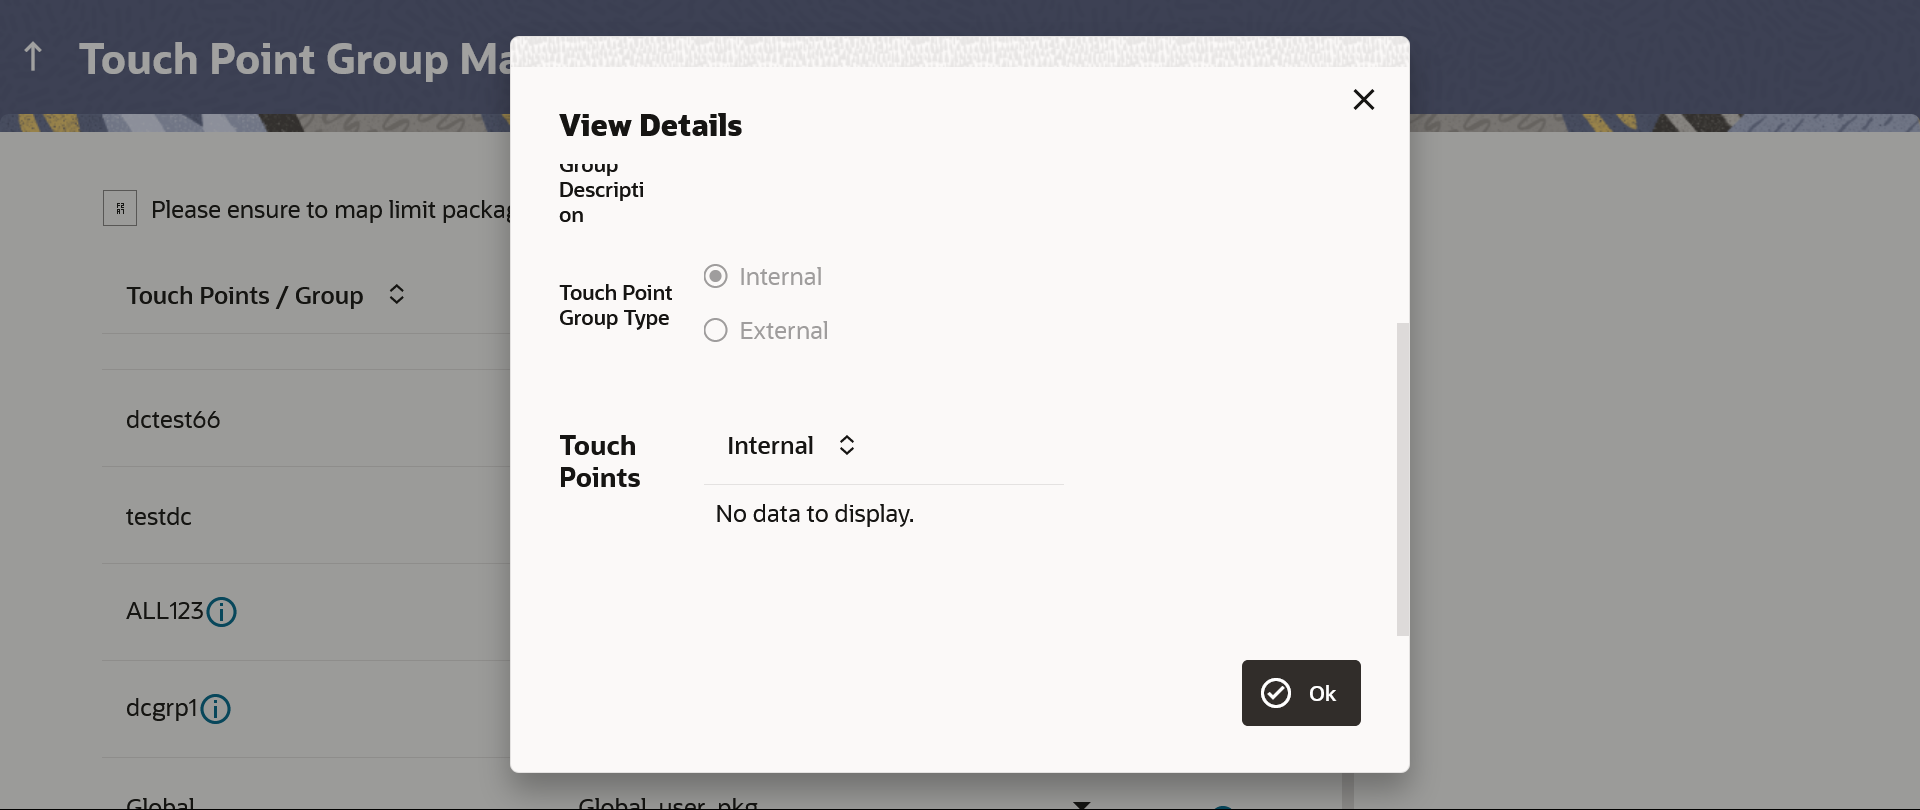 View Details- Touch Point Group